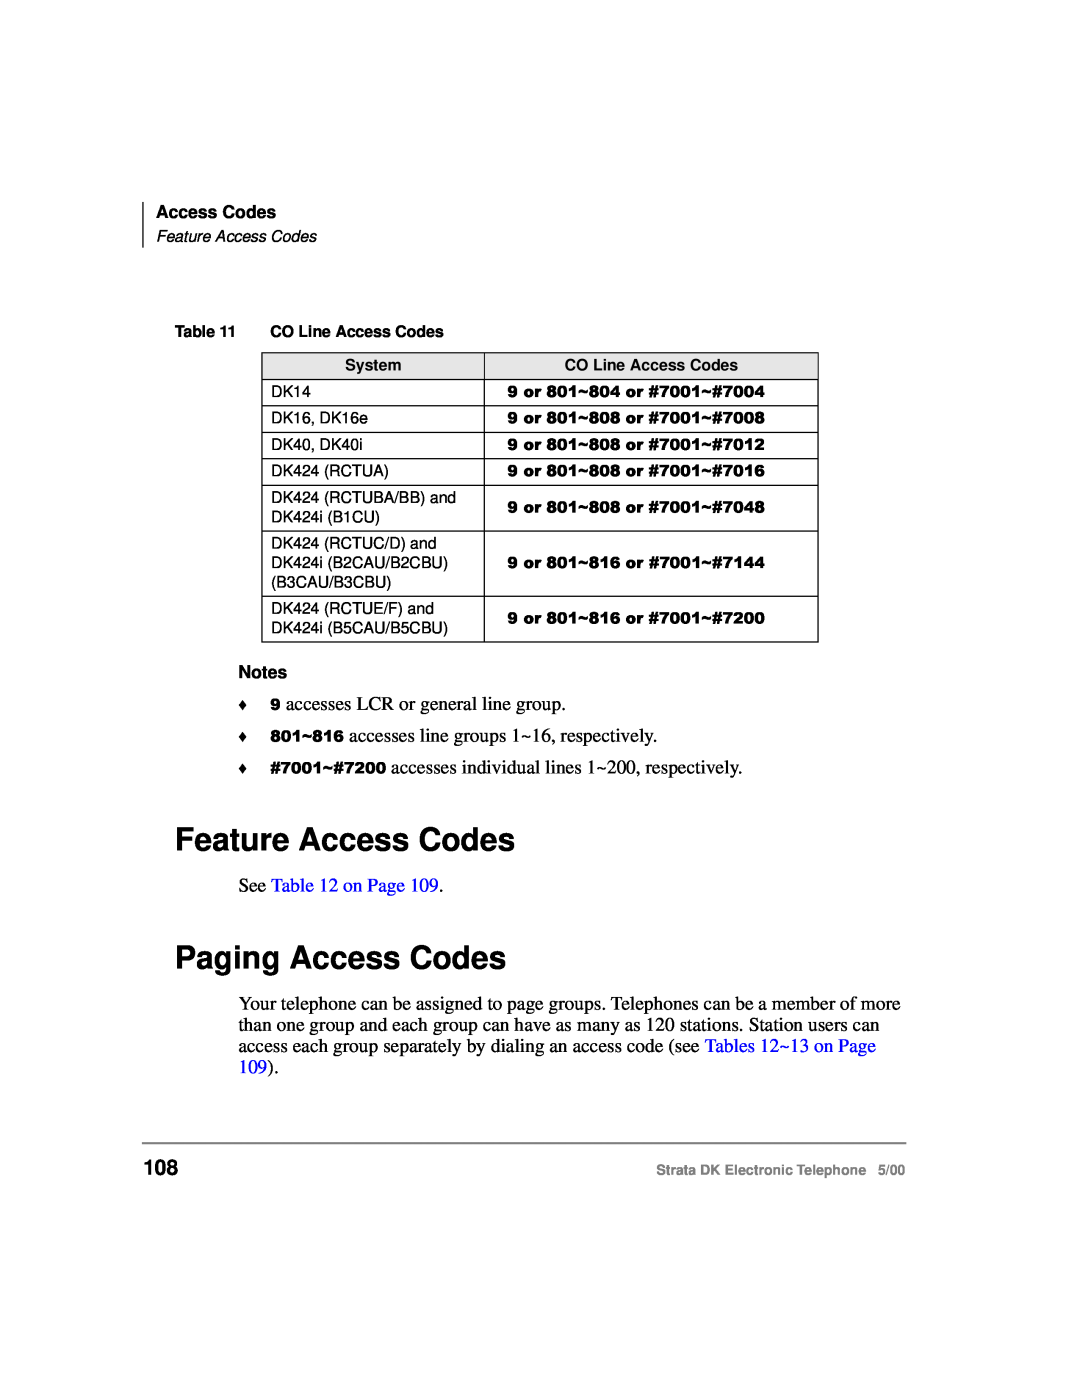 Toshiba Strata DK manual Feature Access Codes, Paging Access Codes, See on Page 